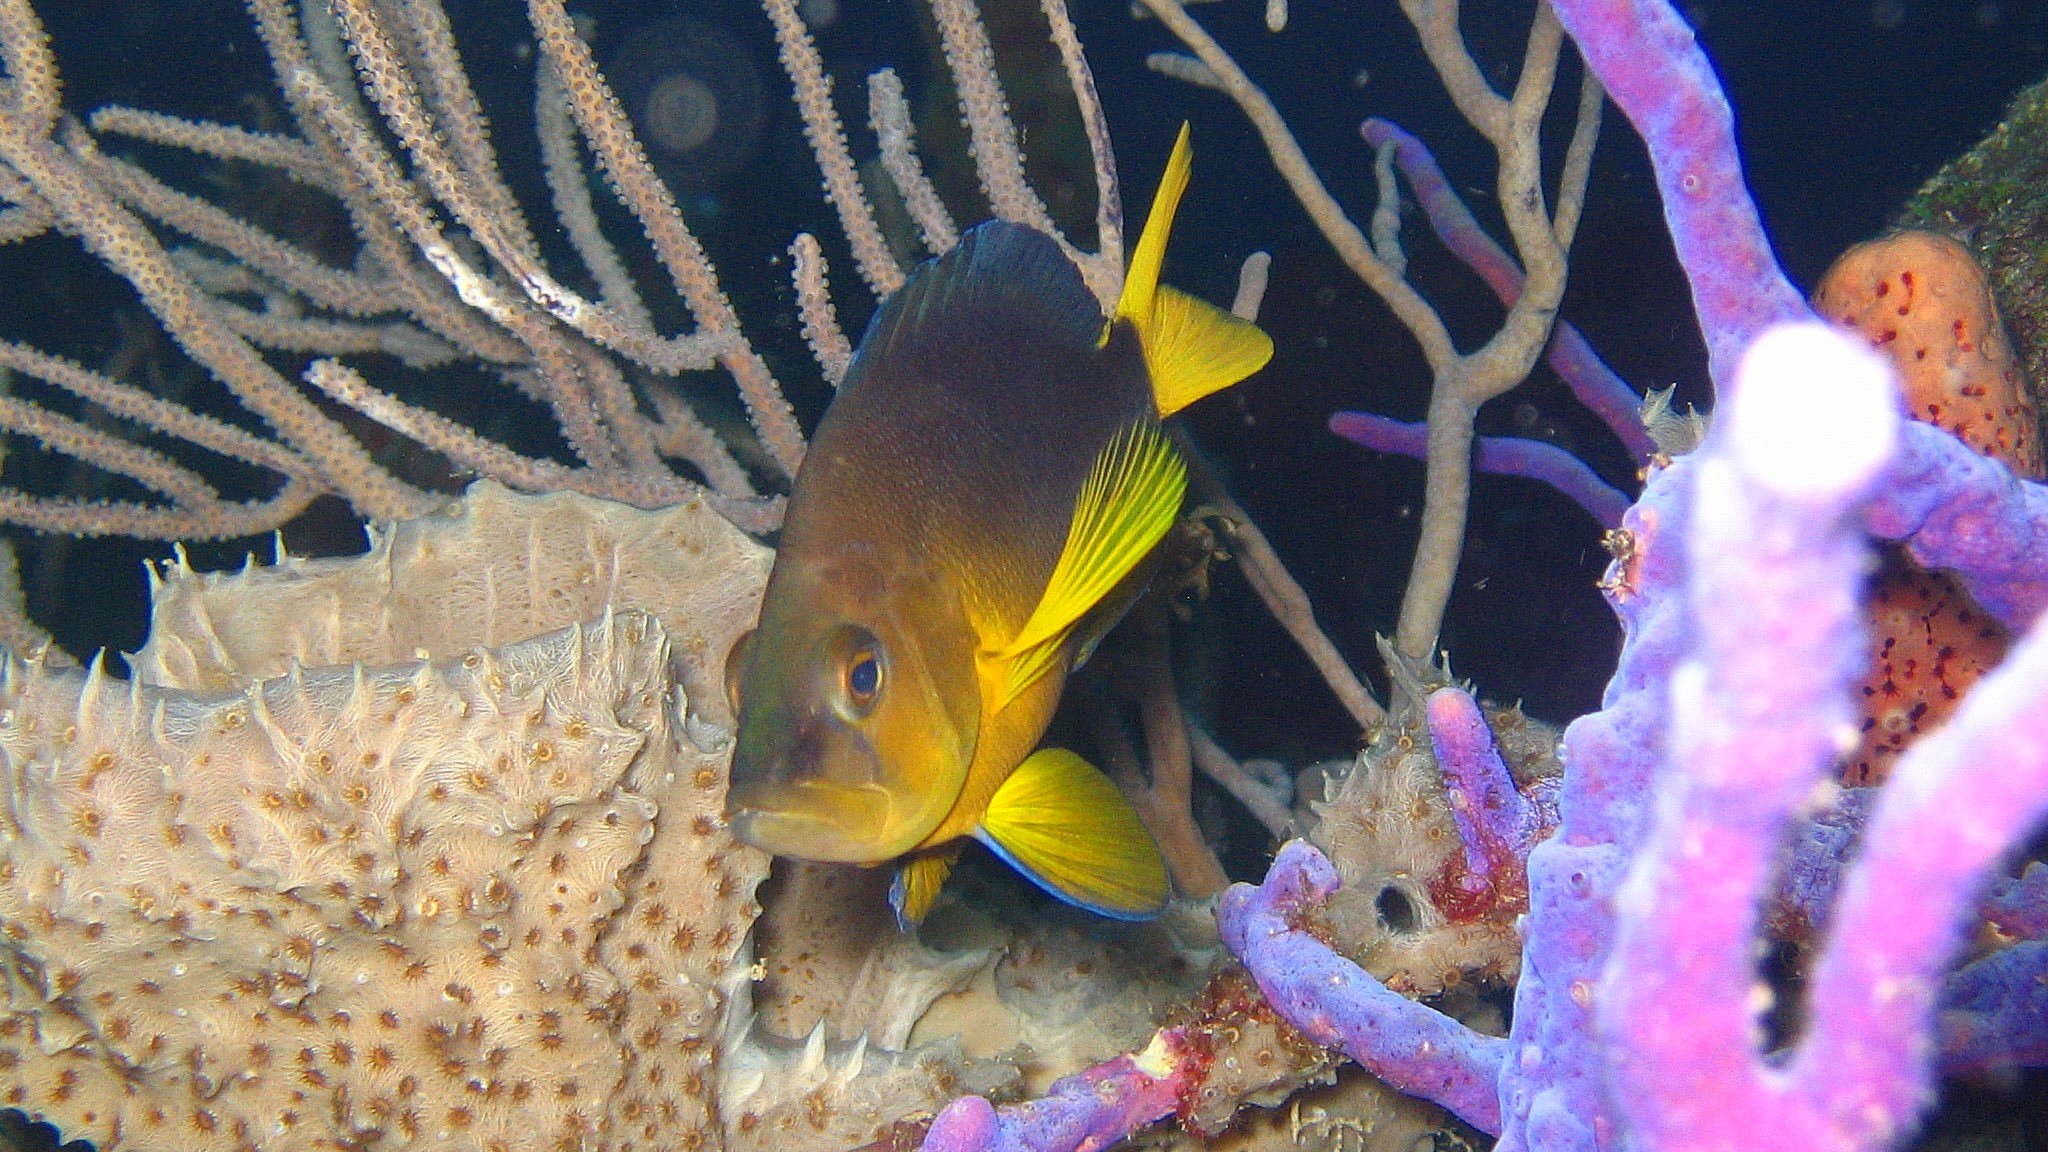 A yellowbelly hamlet (Hypoplectrus aberrans) from Barbados [Photograph by O. Puebla, ZMT].